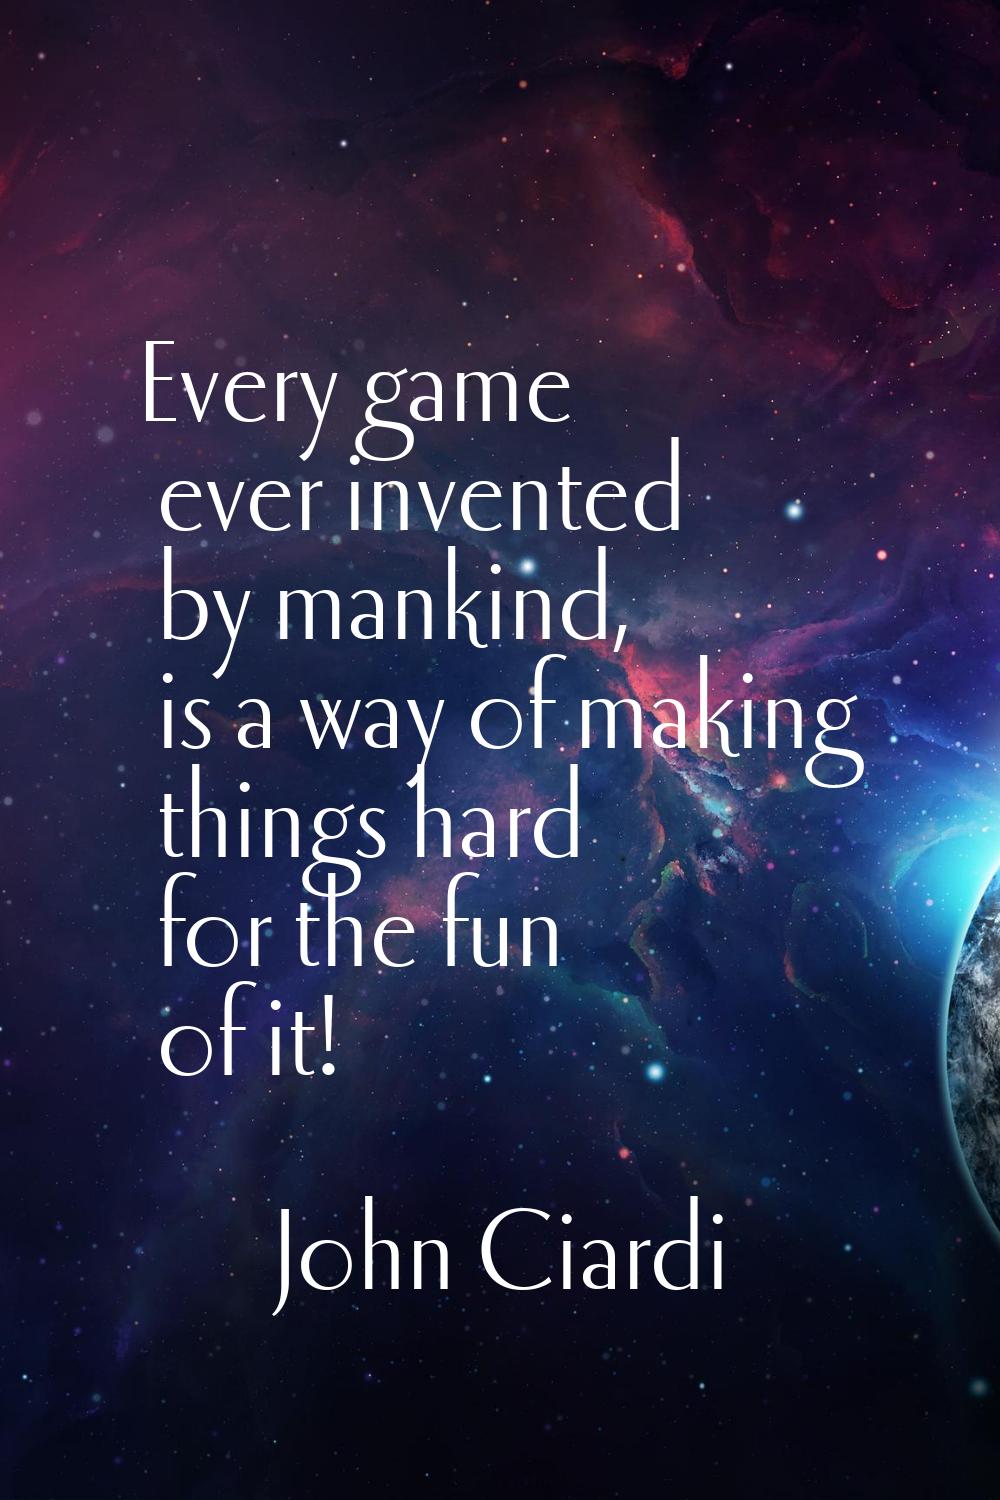 Every game ever invented by mankind, is a way of making things hard for the fun of it!